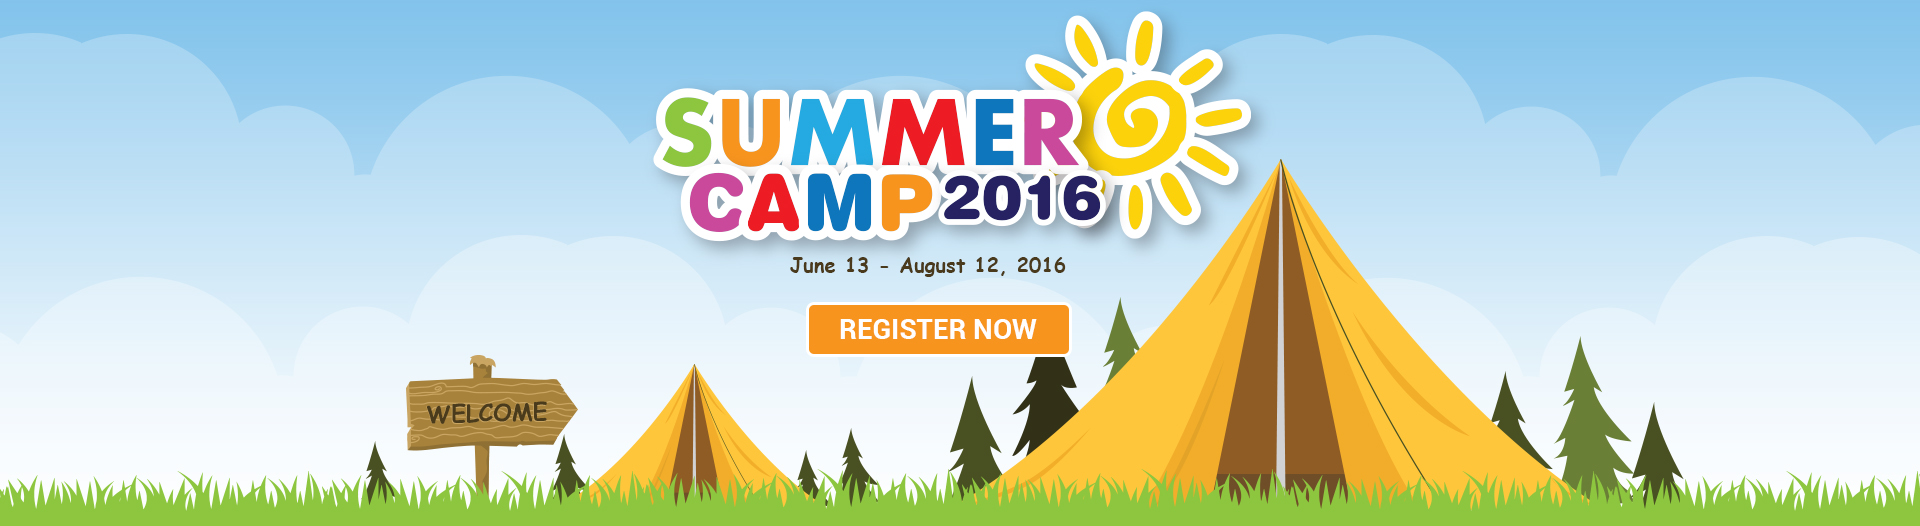 Summer Camp | Amazing Wallpapers